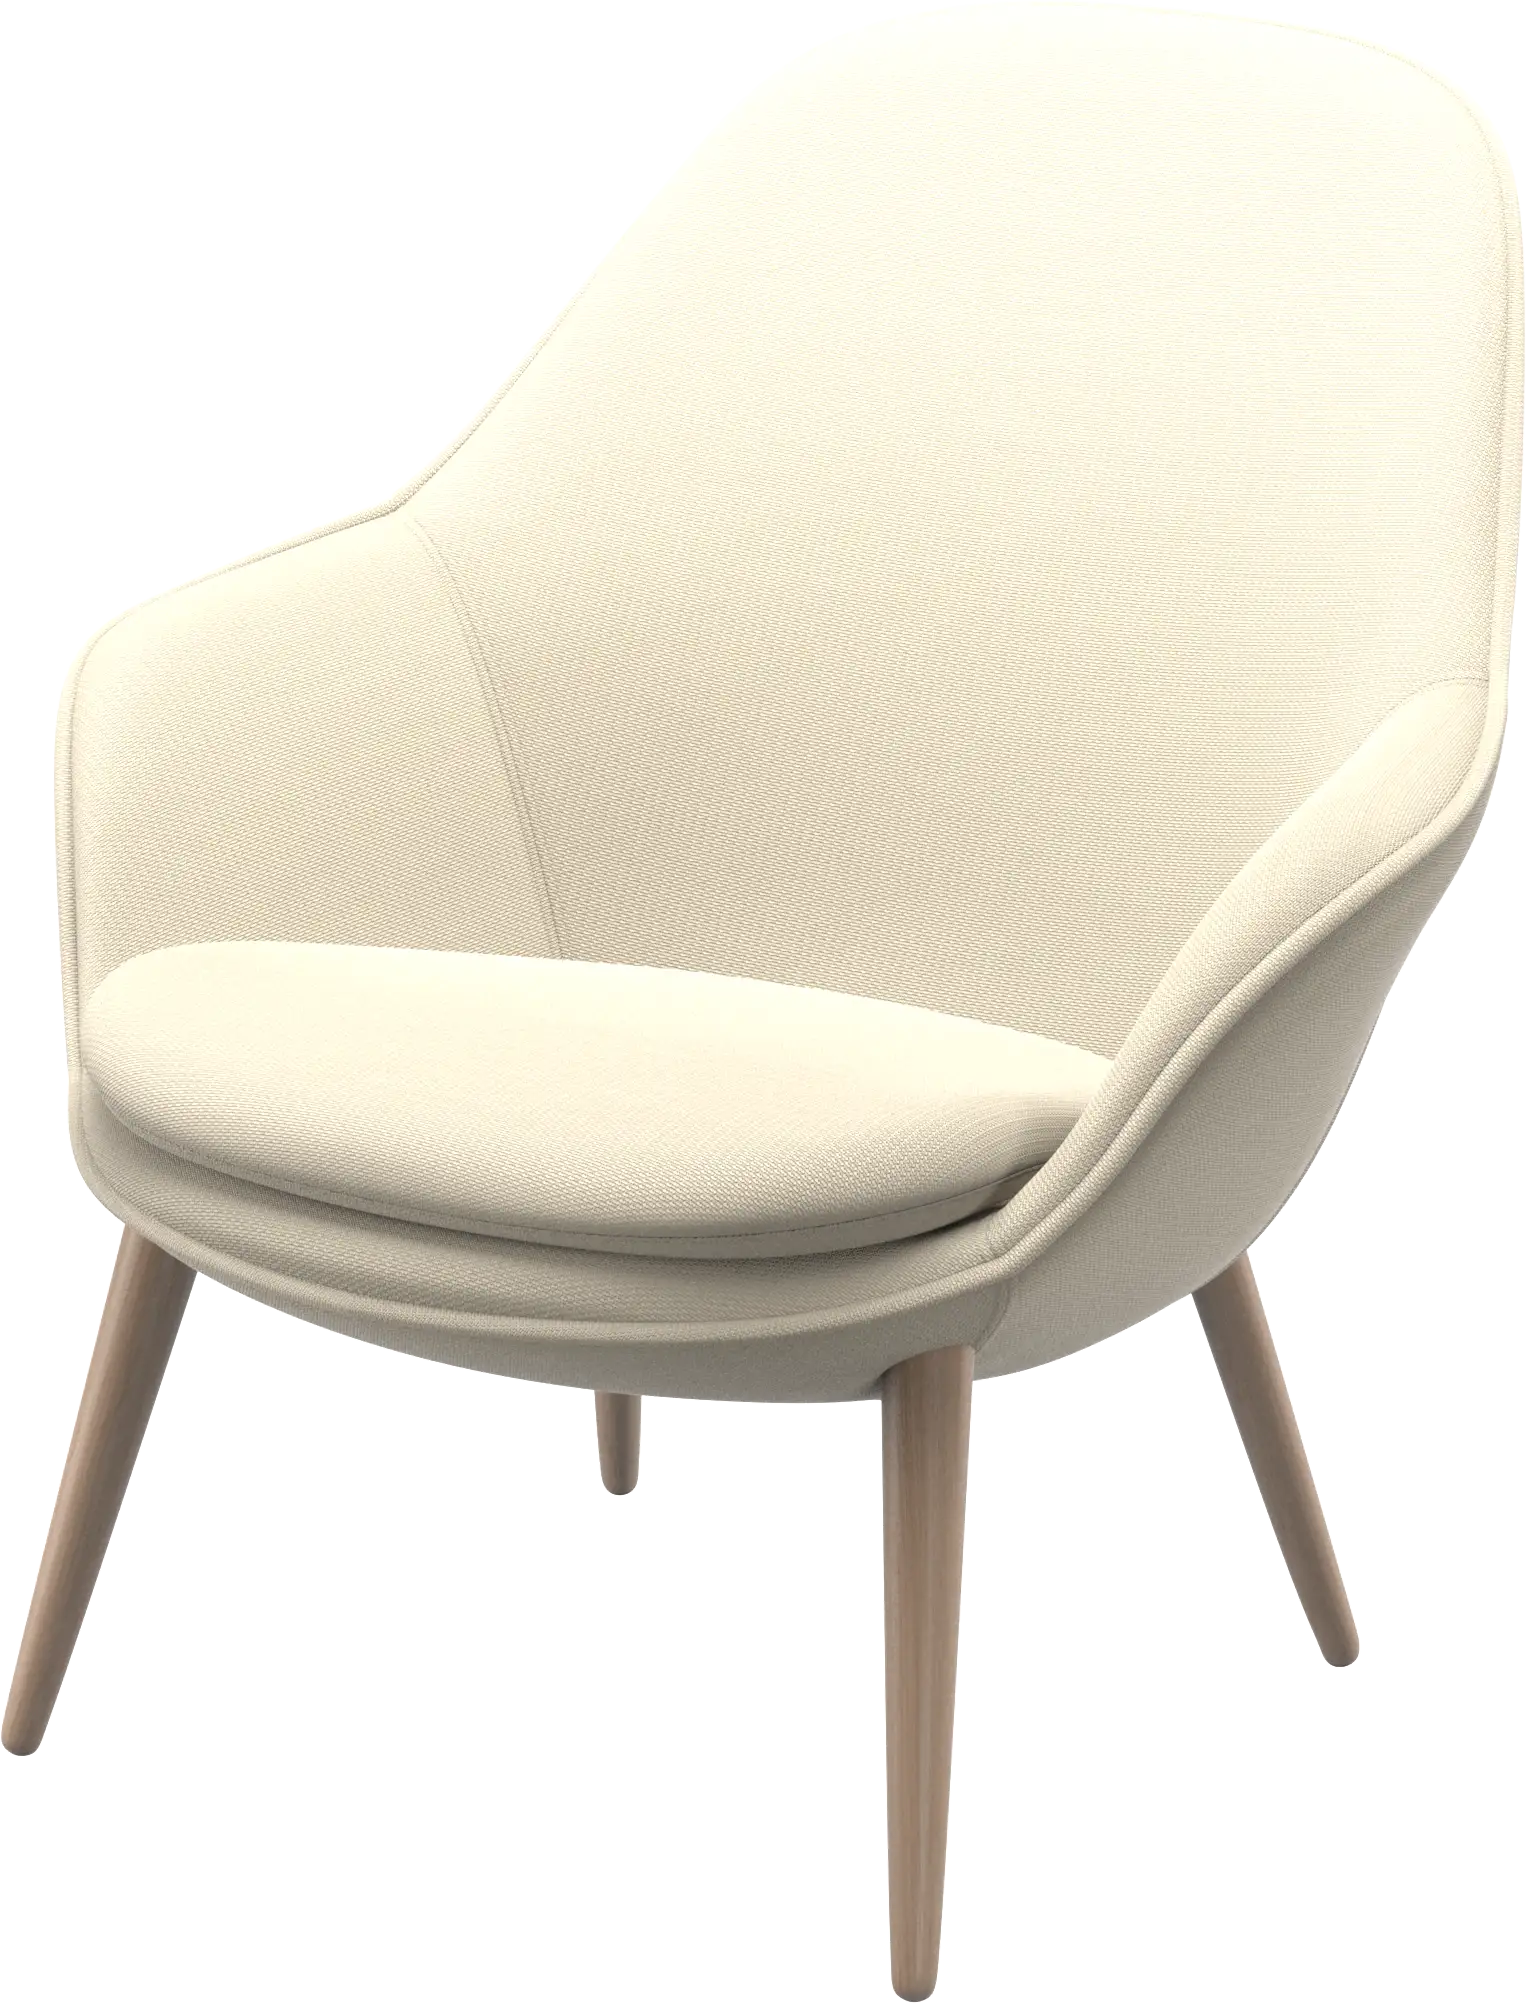 Adelaide fauteuil